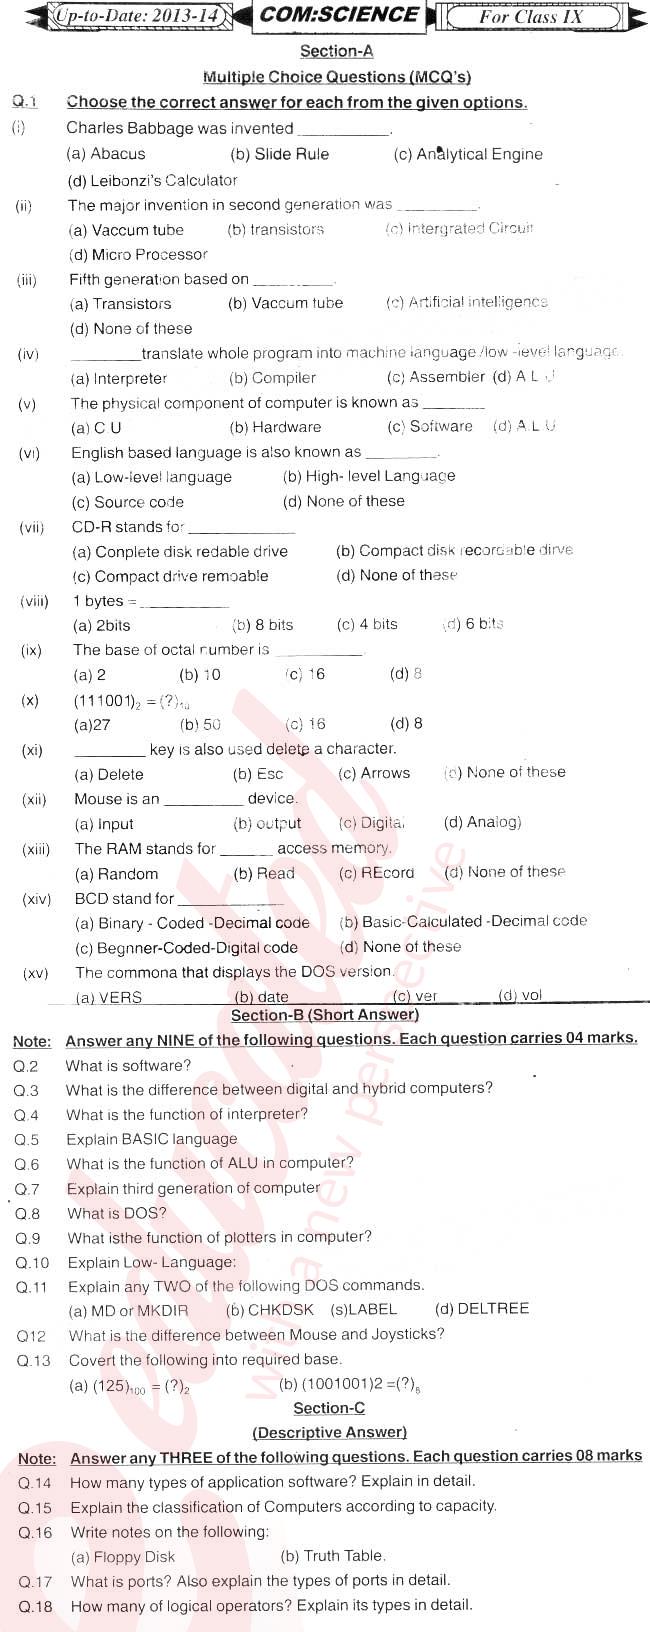 Computer Science 9th English Medium Past Paper Group 1 BISE Hyderabad 2013